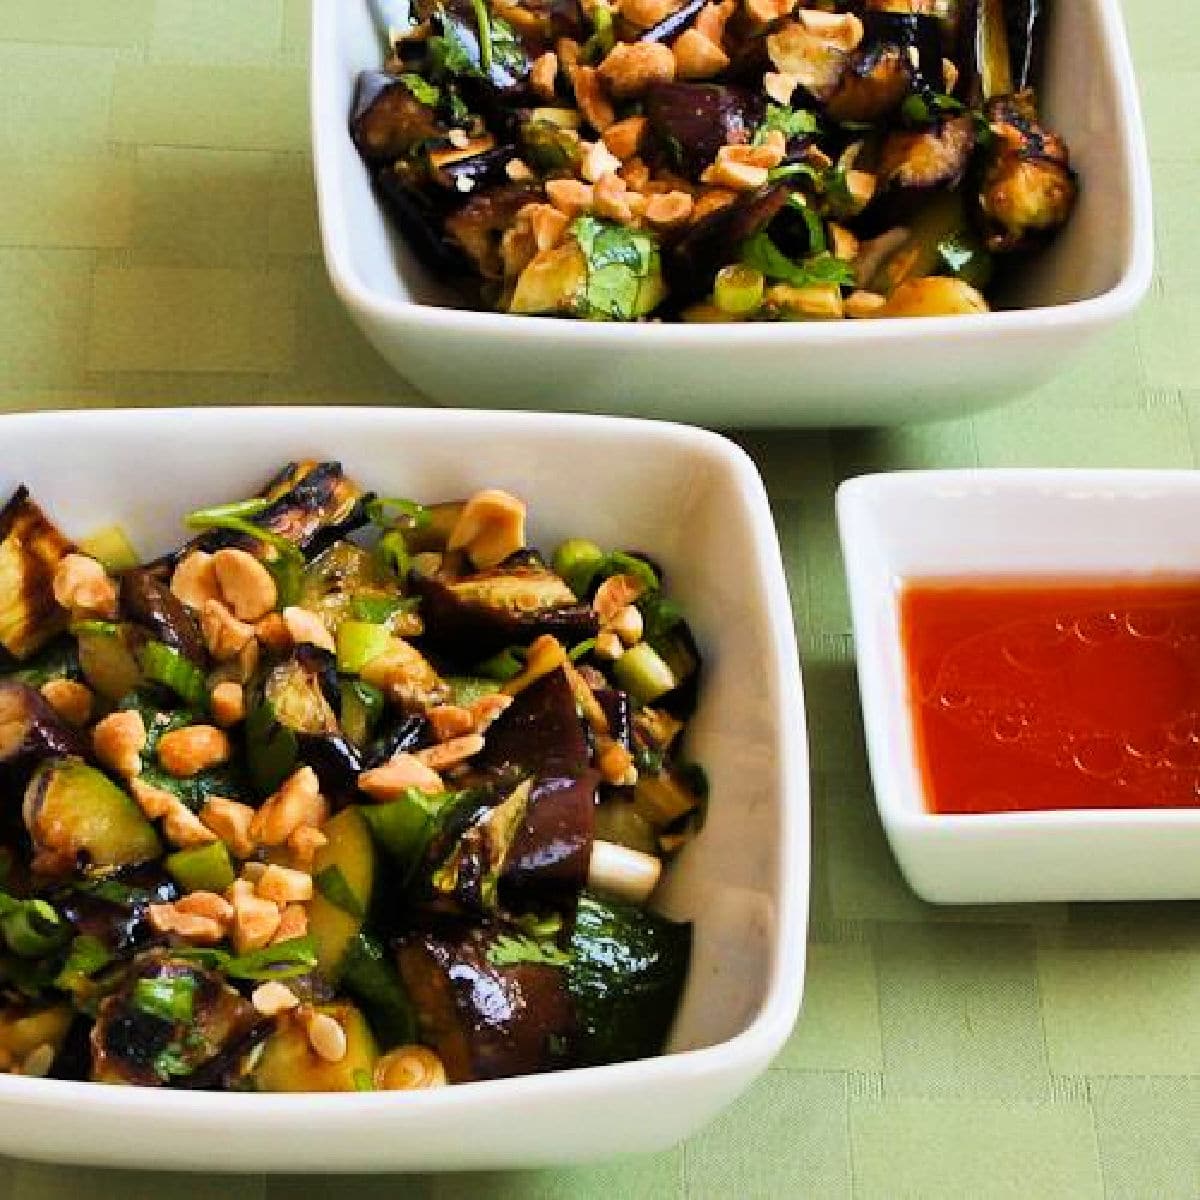 Square image for Thai Eggplant and Zucchini Salad shown in two serving bowls with spicy dressing.